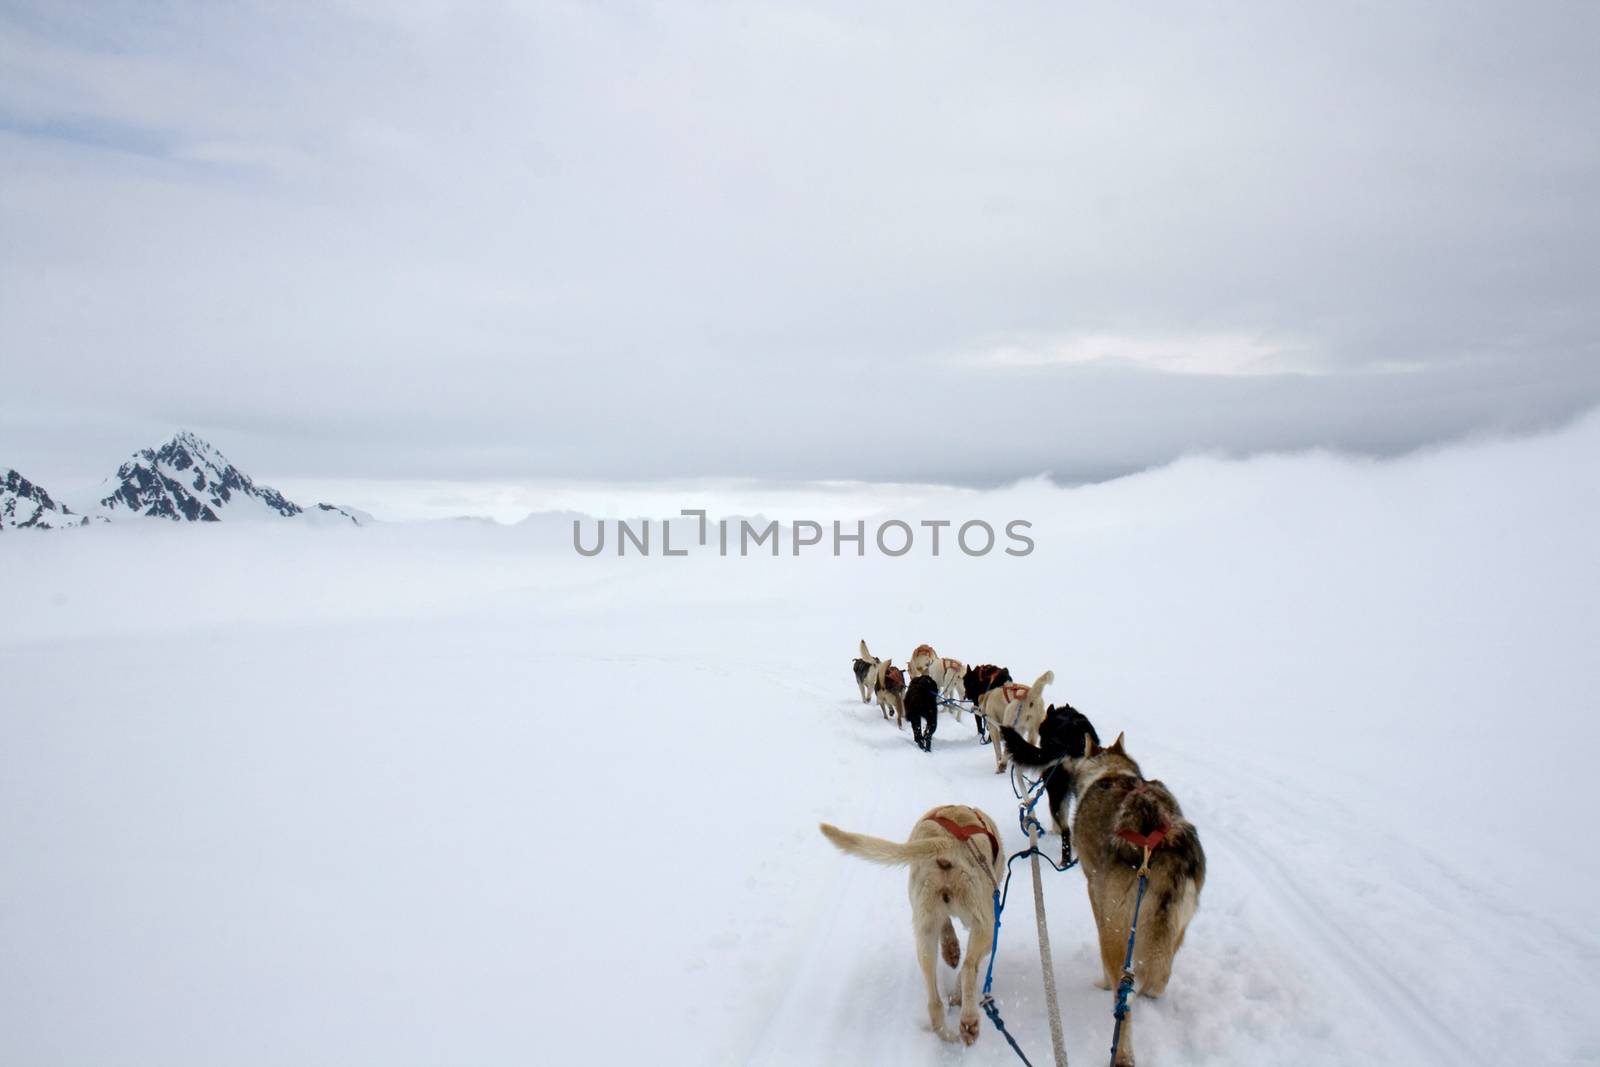 View from the sled being pulled by dogs across the snow in Alaska.